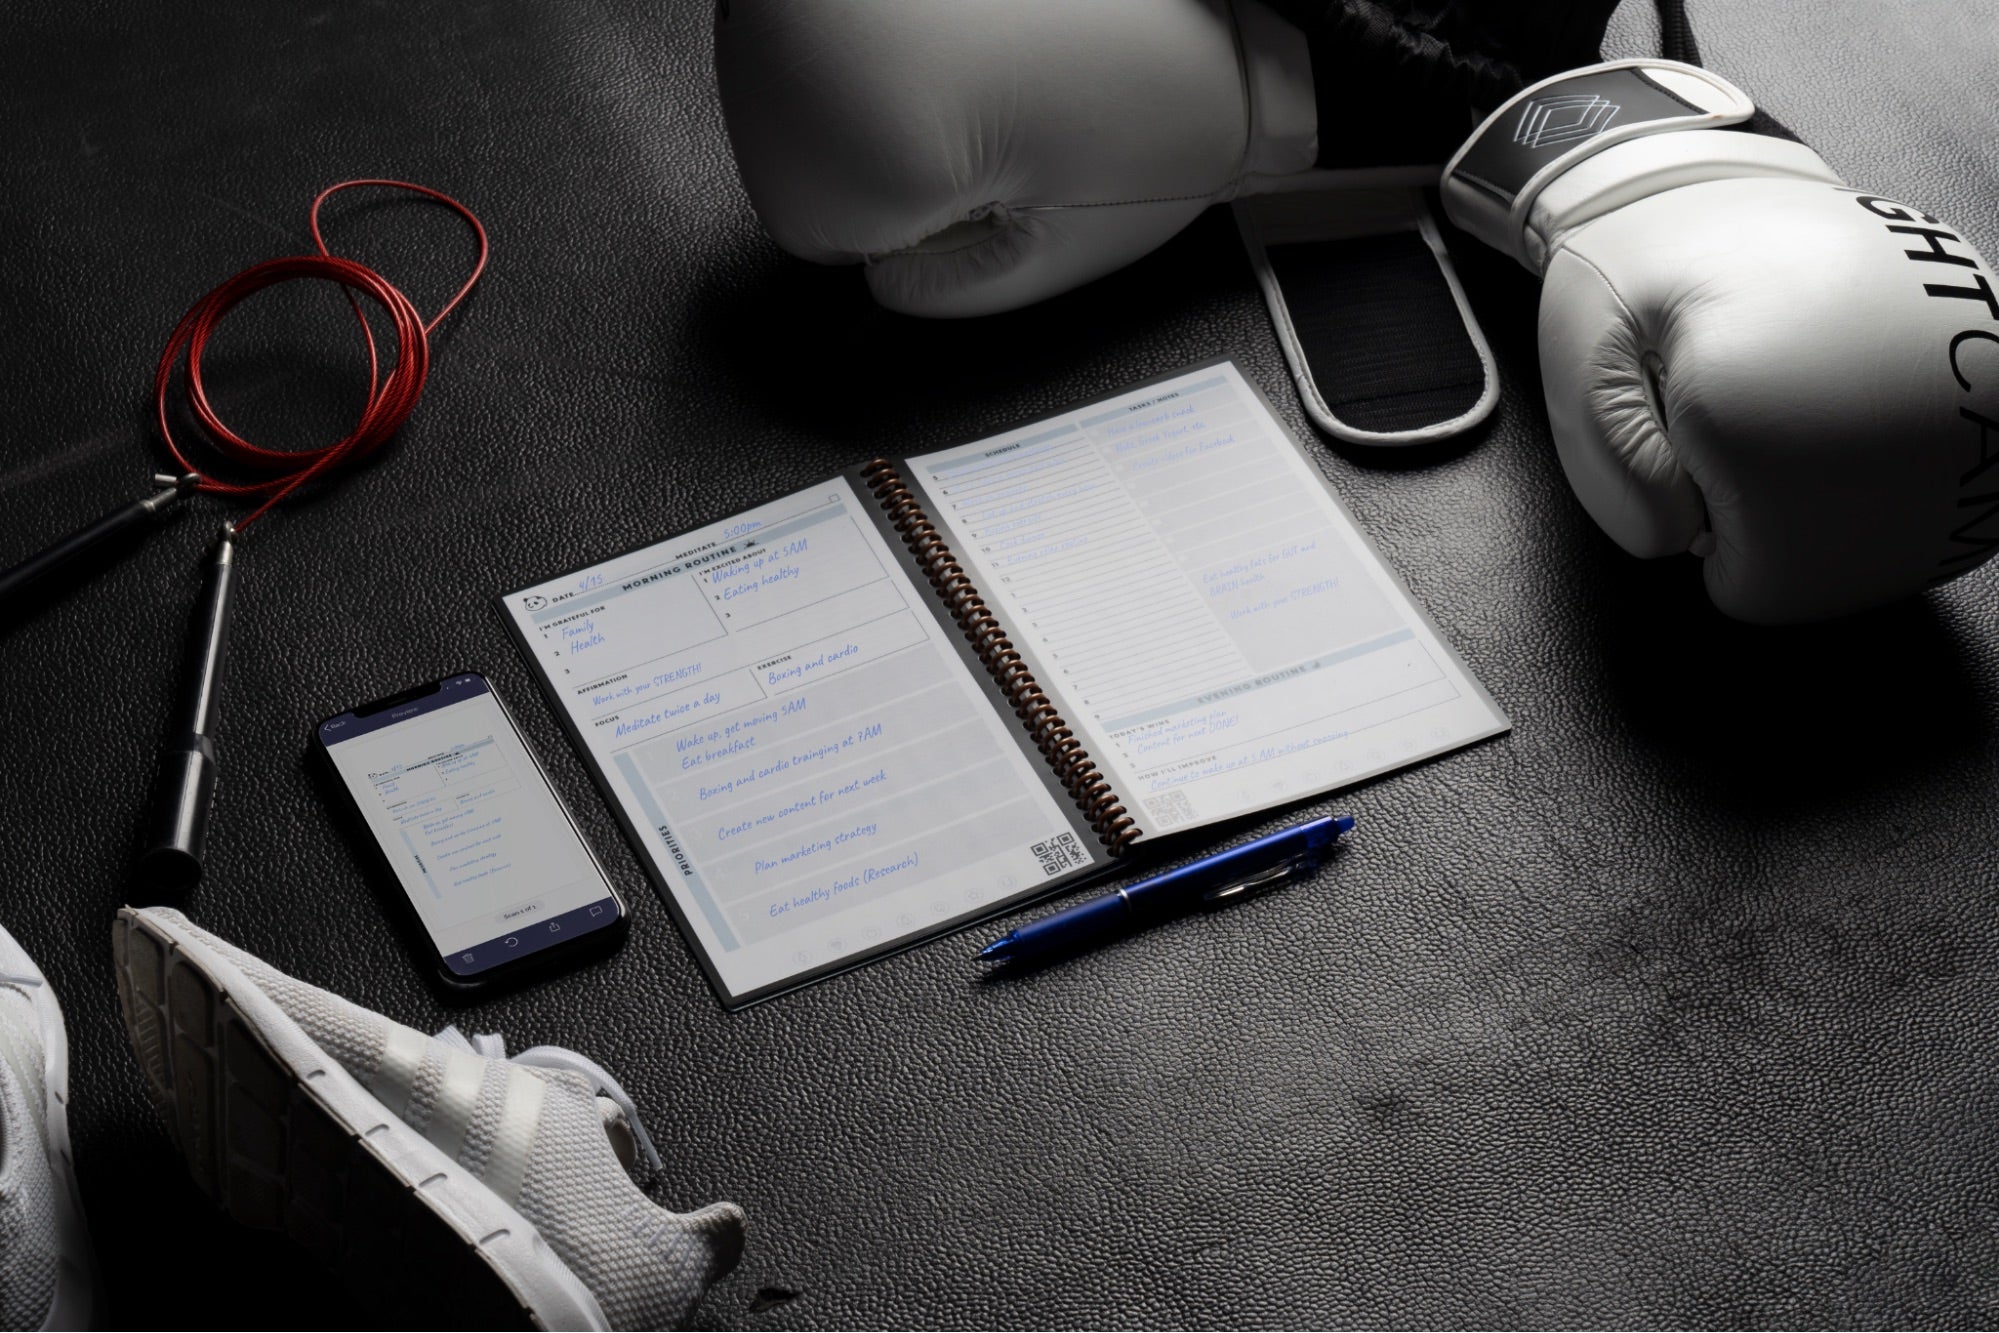 A Rocketbook notebook along with a smartphone displaying its app backdropped with workout gear like boxing gloves and running shoes.